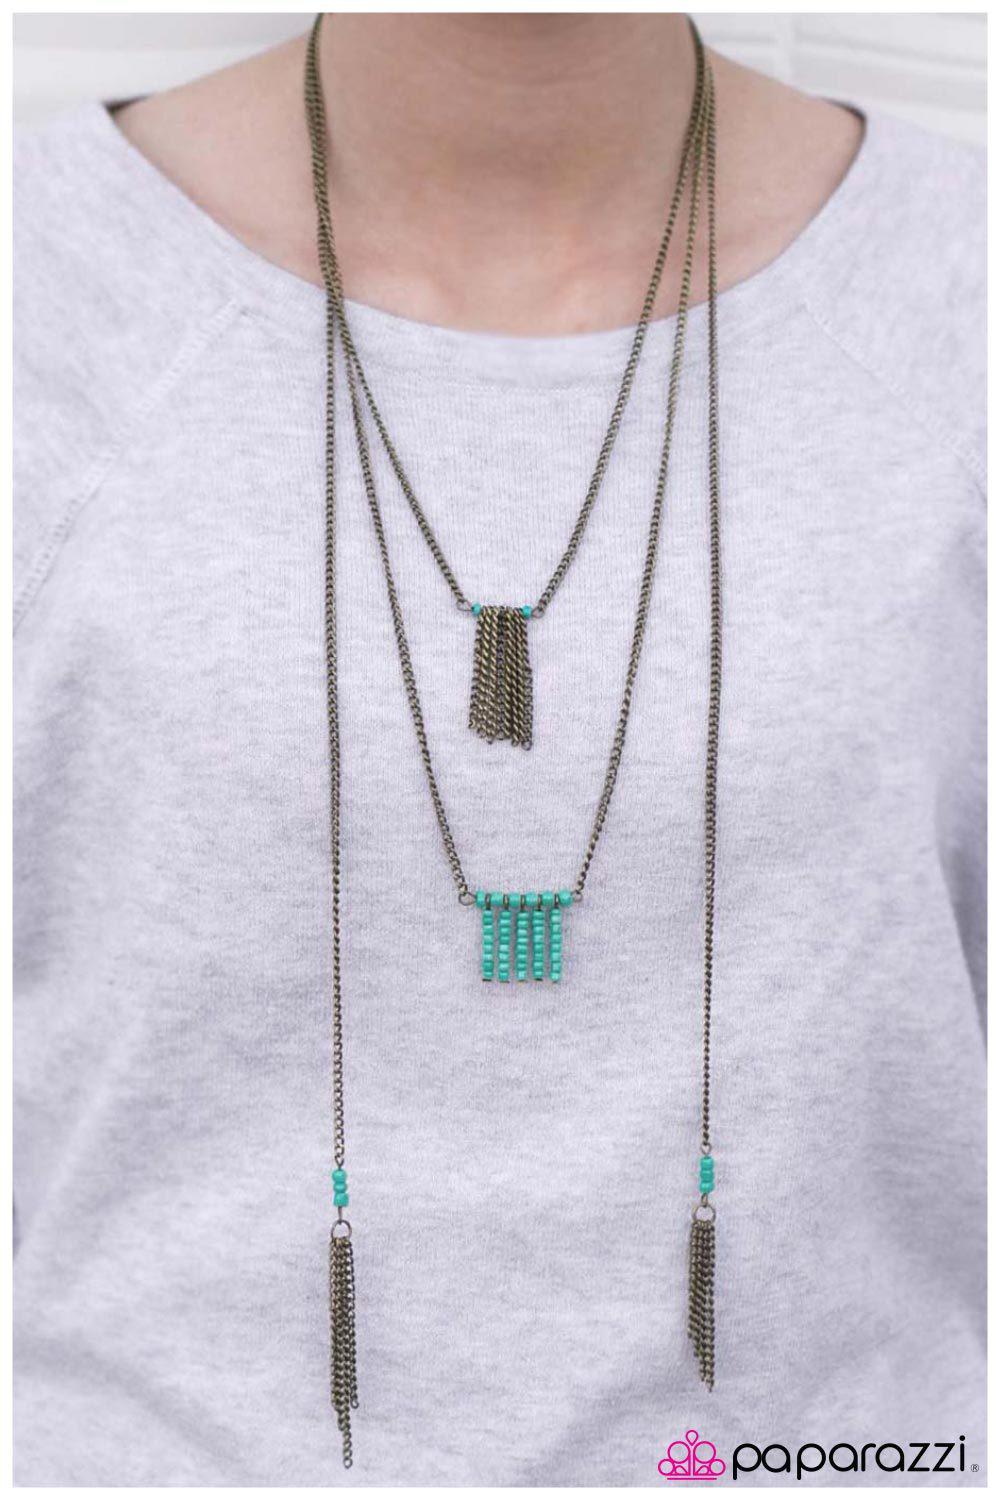 Perfect Balance Brass and Turquoise Blue Seed Bead Necklace - Paparazzi Accessories-CarasShop.com - $5 Jewelry by Cara Jewels